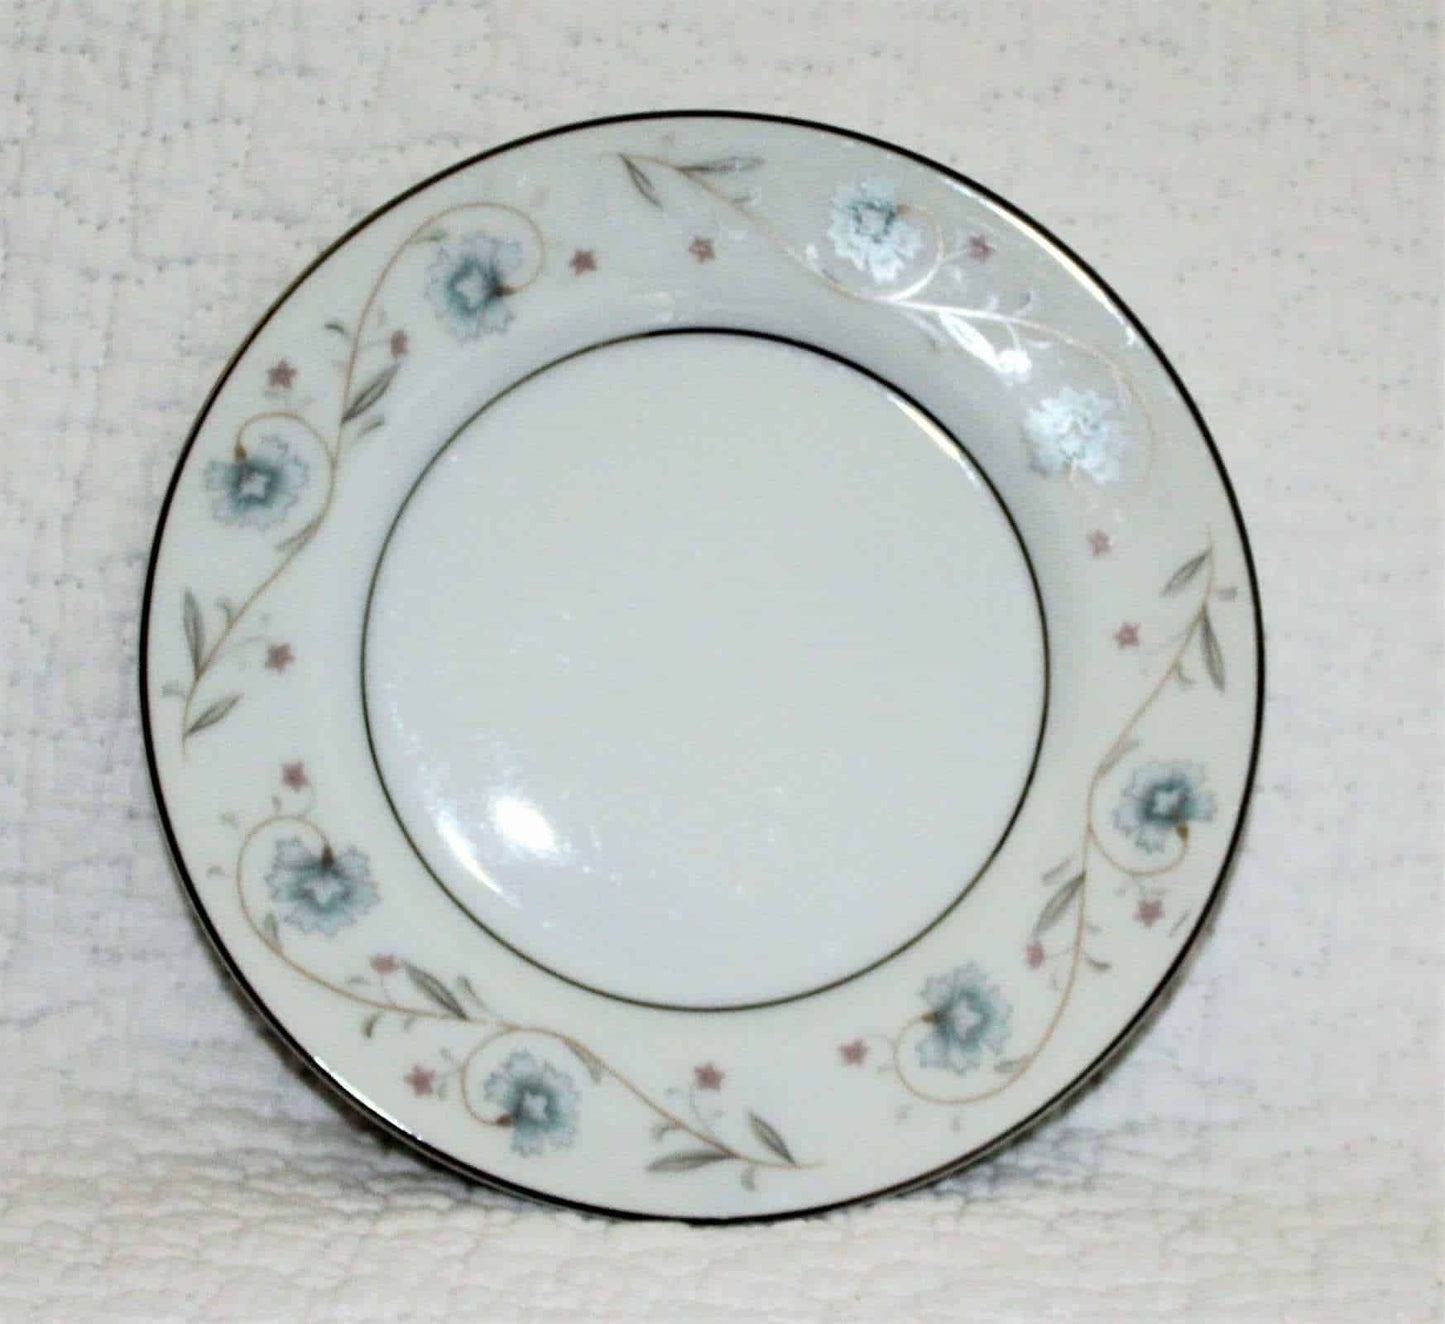 Bread & Butter Plates, Fine China of Japan, English Garden, Set of 4, Vintage